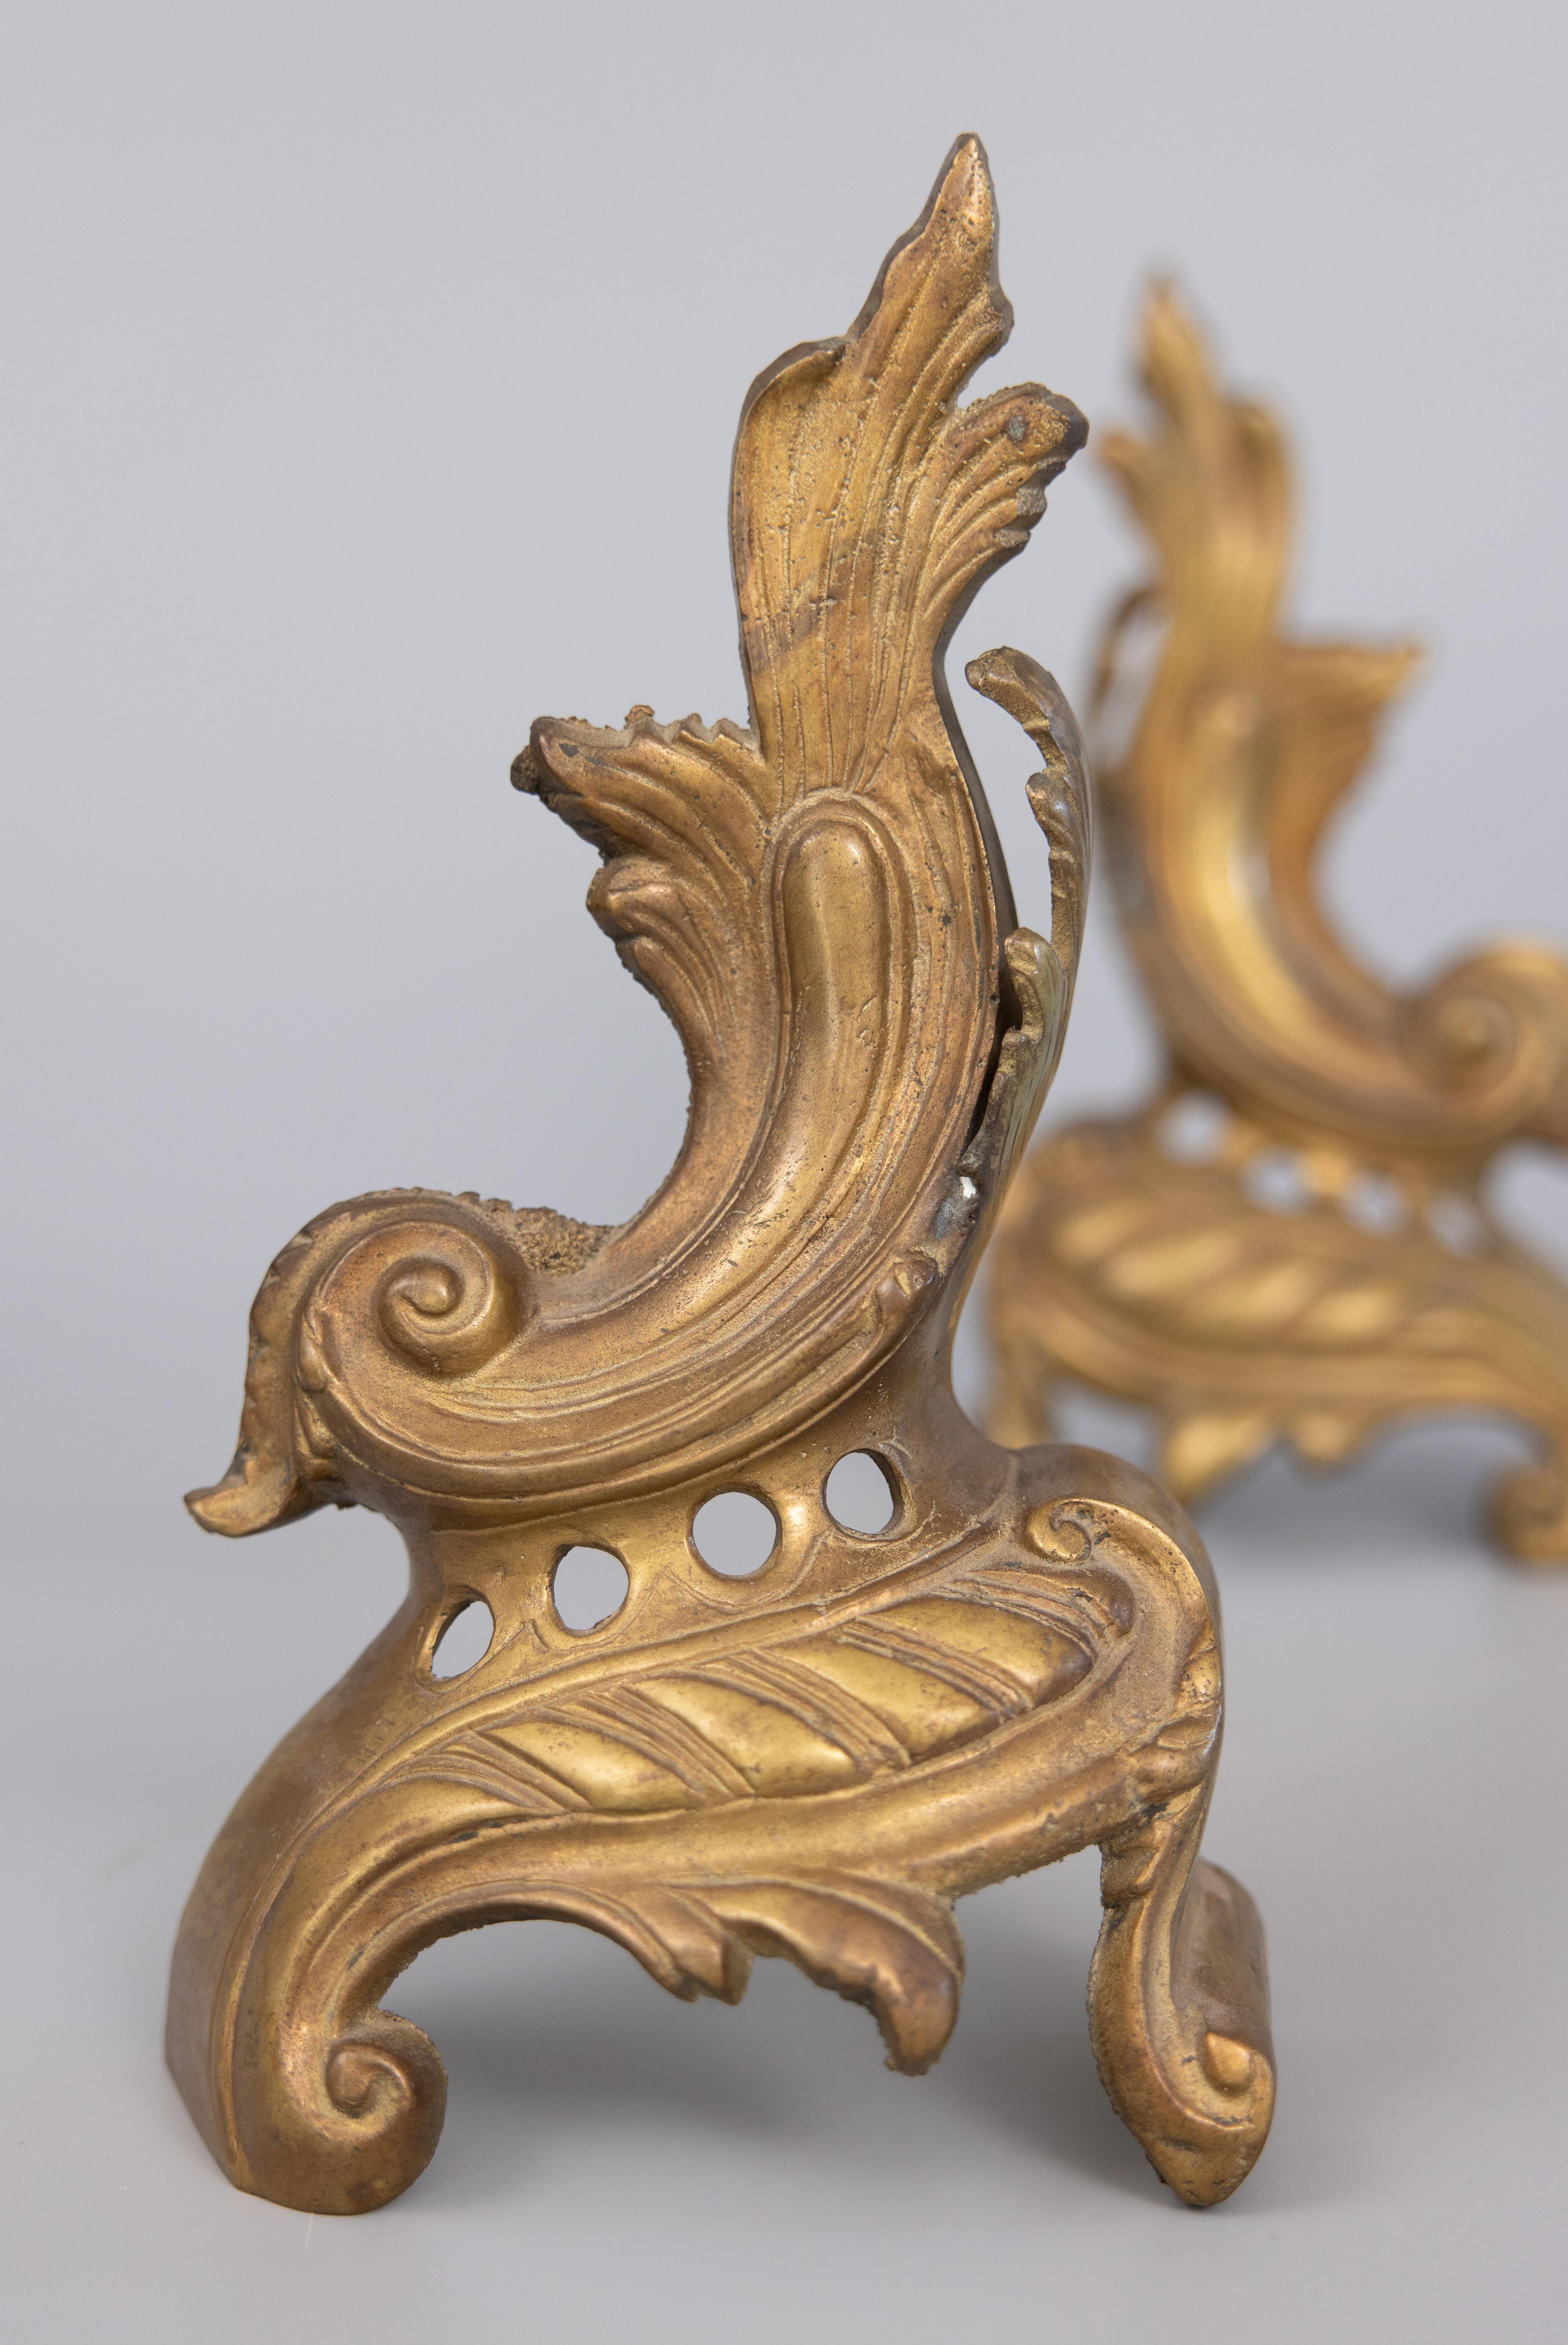 A gorgeous pair of 19th century French ornate brass mantel ornaments or bookends with stylized acanthus leaves. They would be lovely displayed on a mantel, bookshelf, or desk.